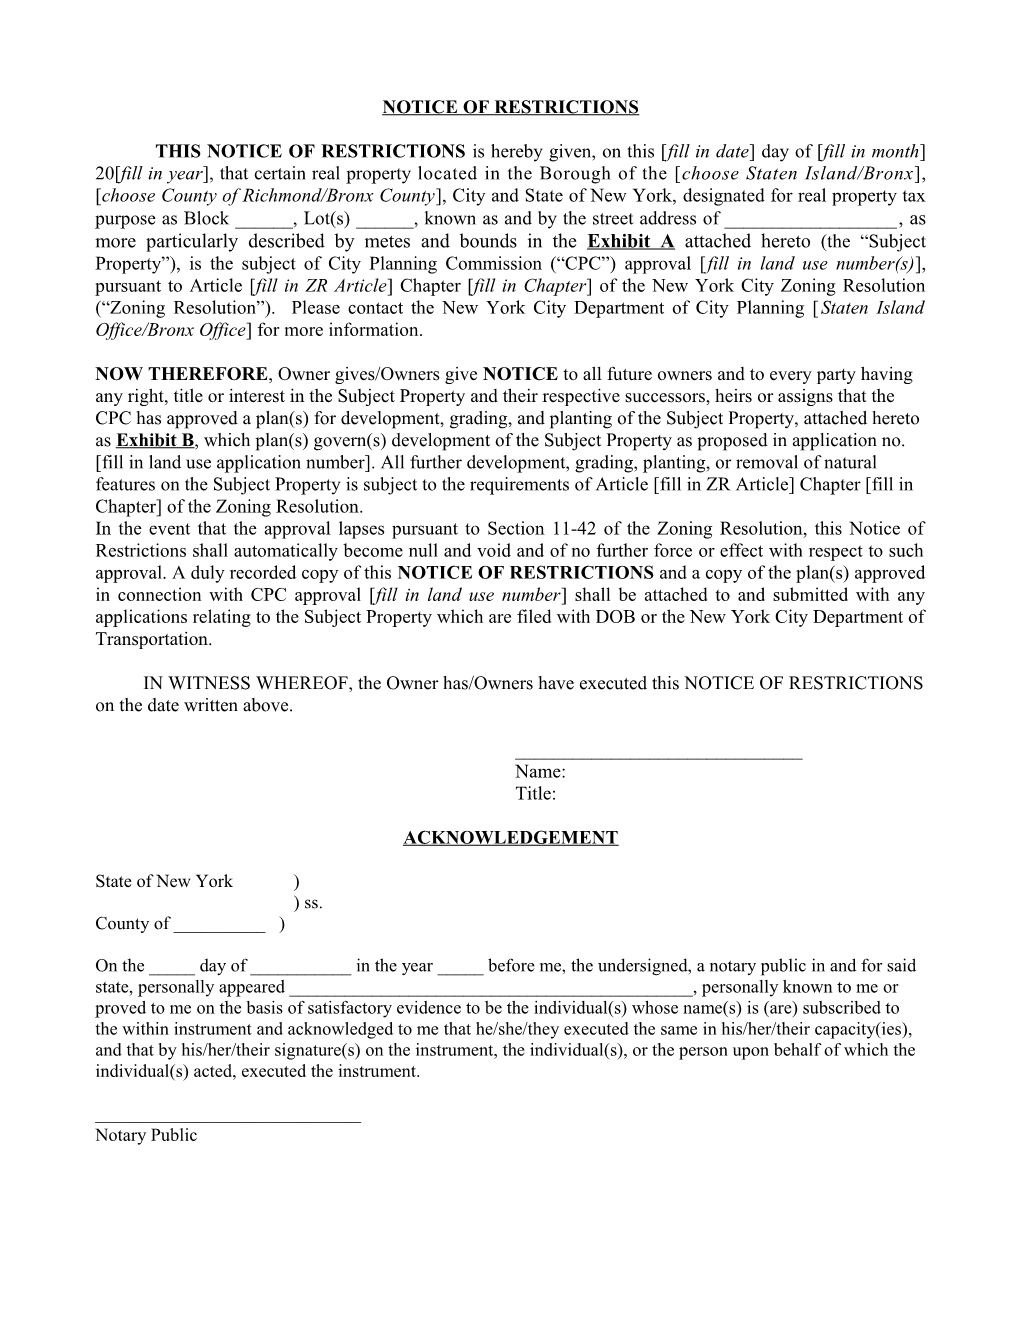 Instructions for Hillsides Authorization and Restoration Plan Notice of Restrictions